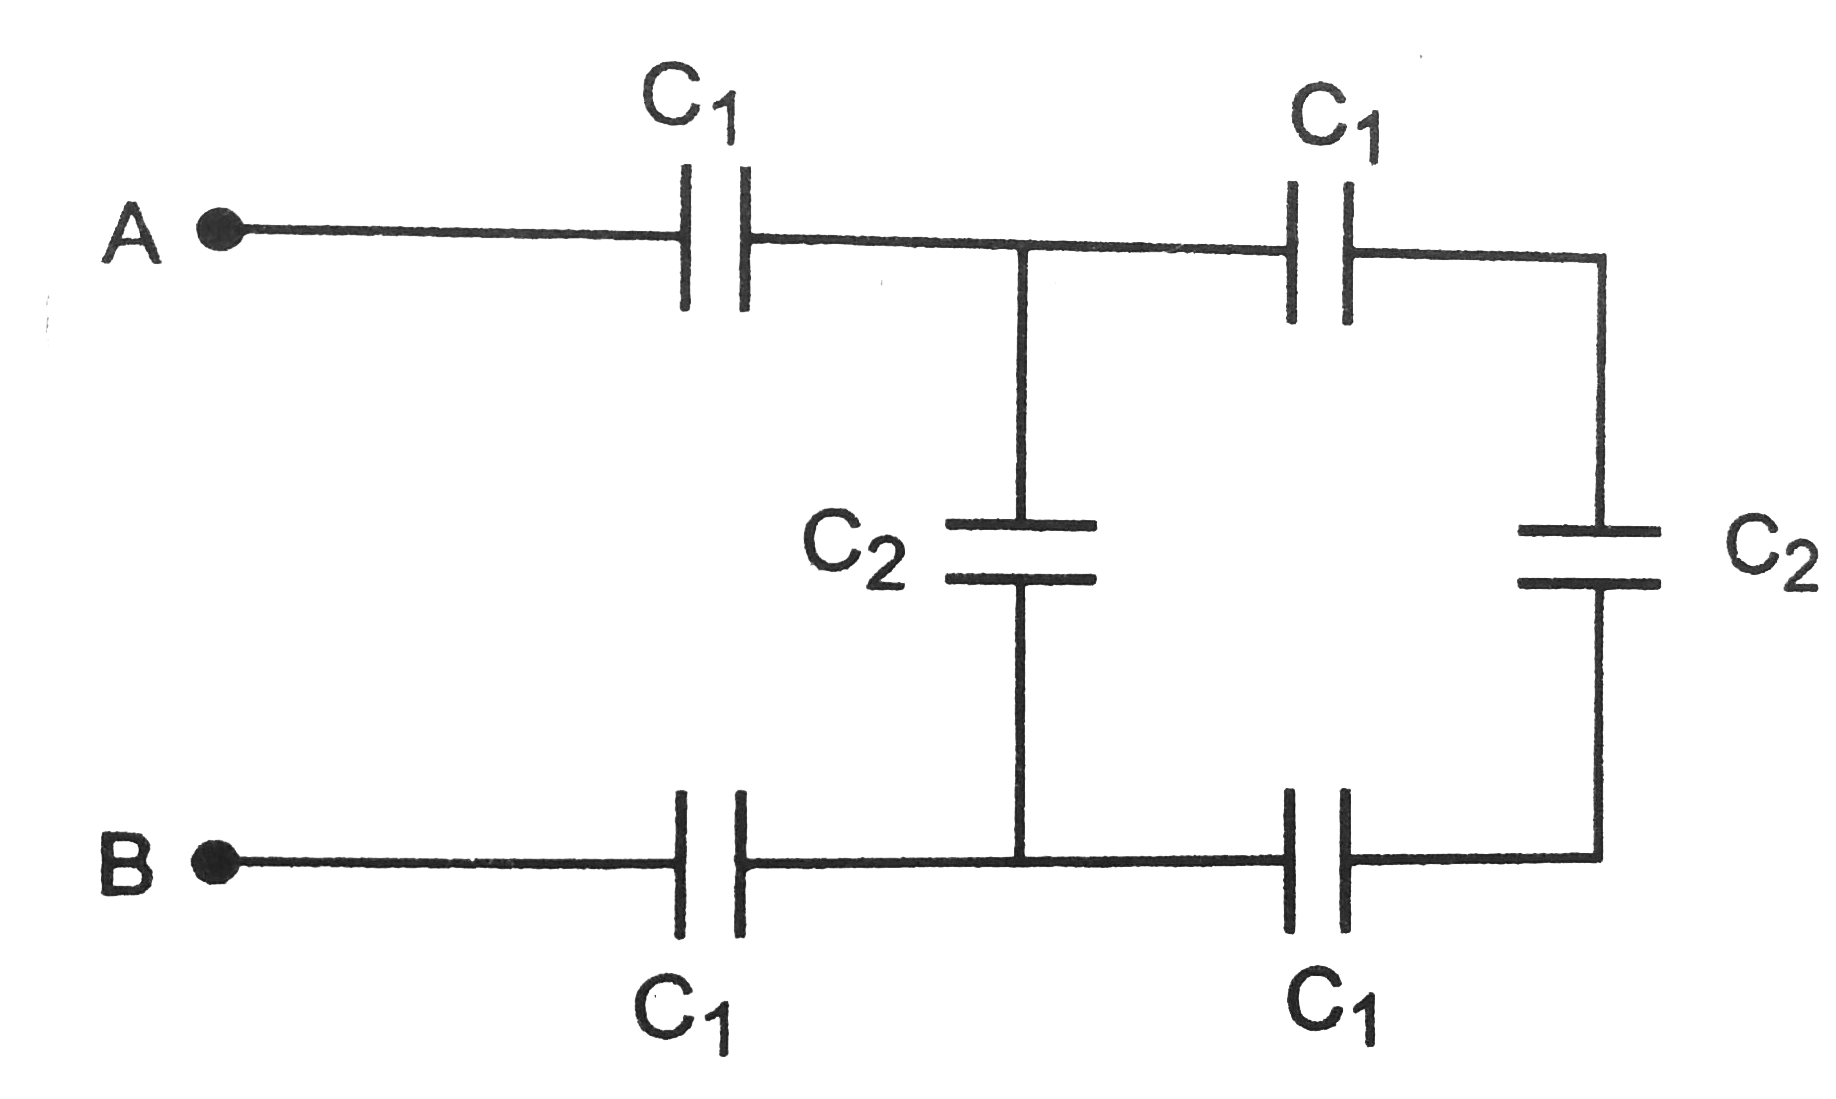 If C(1) = 3 pF and C(2) = 2 pF, calculate the equivalent capacitance of the network shown in Fig between  points A and B.